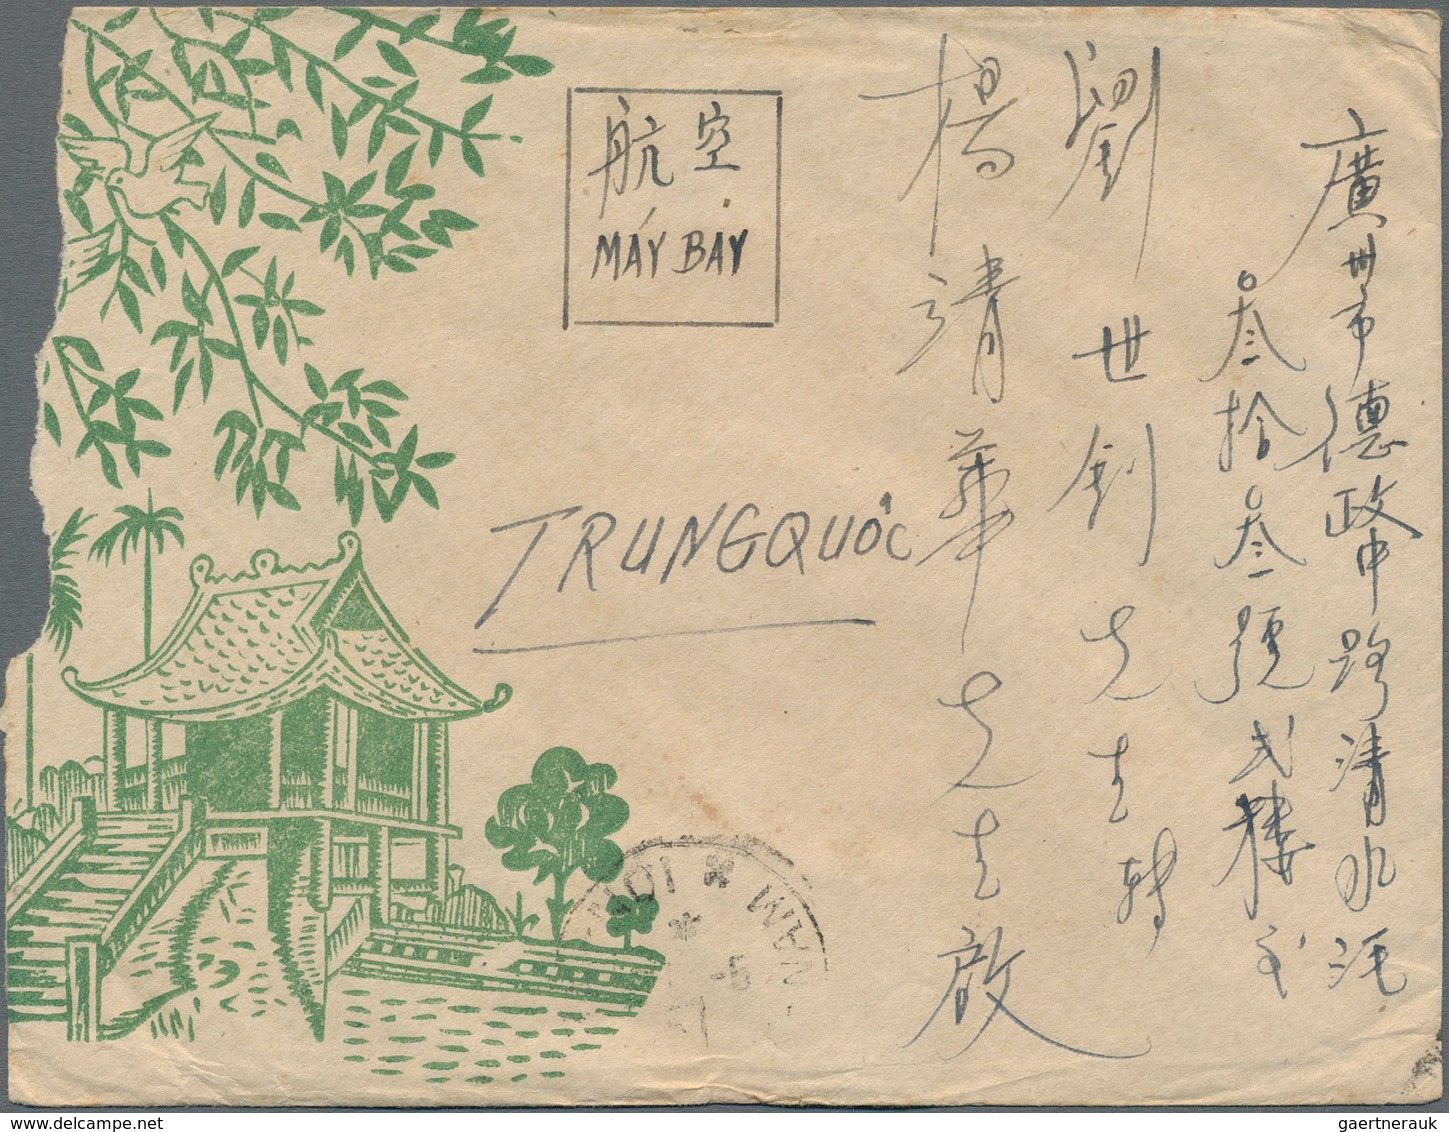 Vietnam-Nord (1945-1975): 1957. Decorative Air Mail Letter Of The Second Weight Level (300D Basic Ta - Vietnam